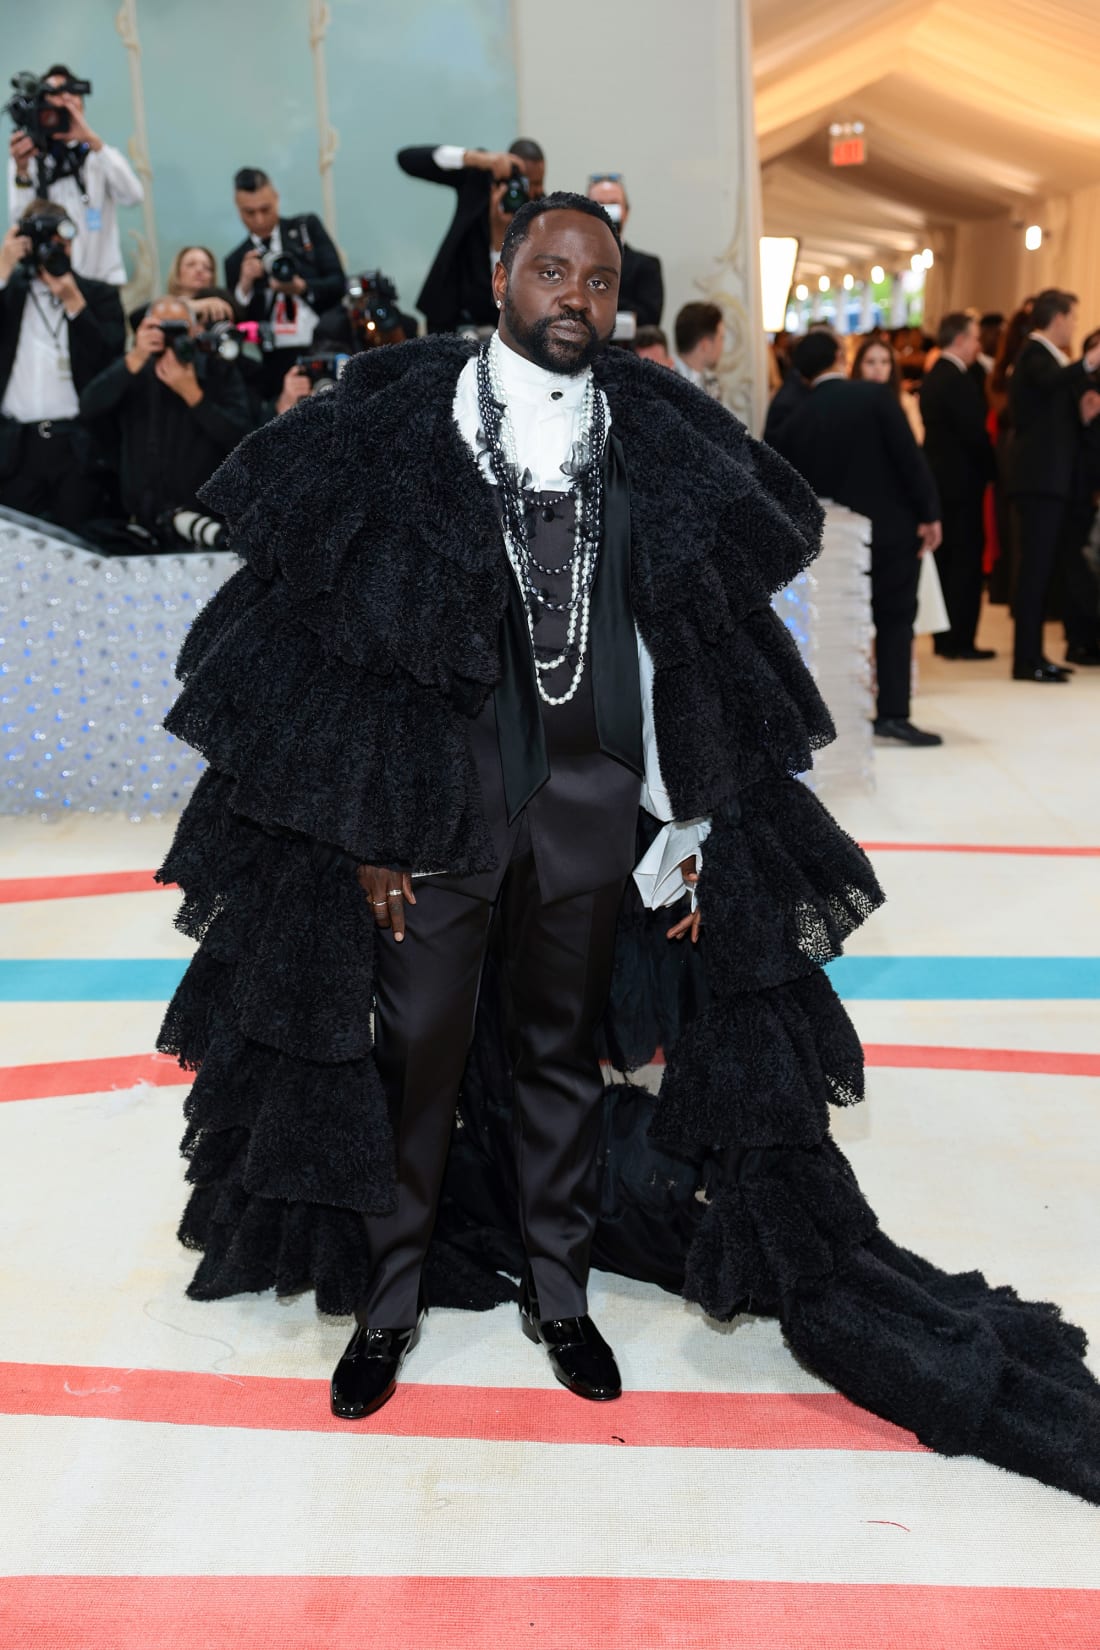 Actor Brian Tyree Henry layered pearls with his regal ensemble, designed by label Karl Lagerfeld.
